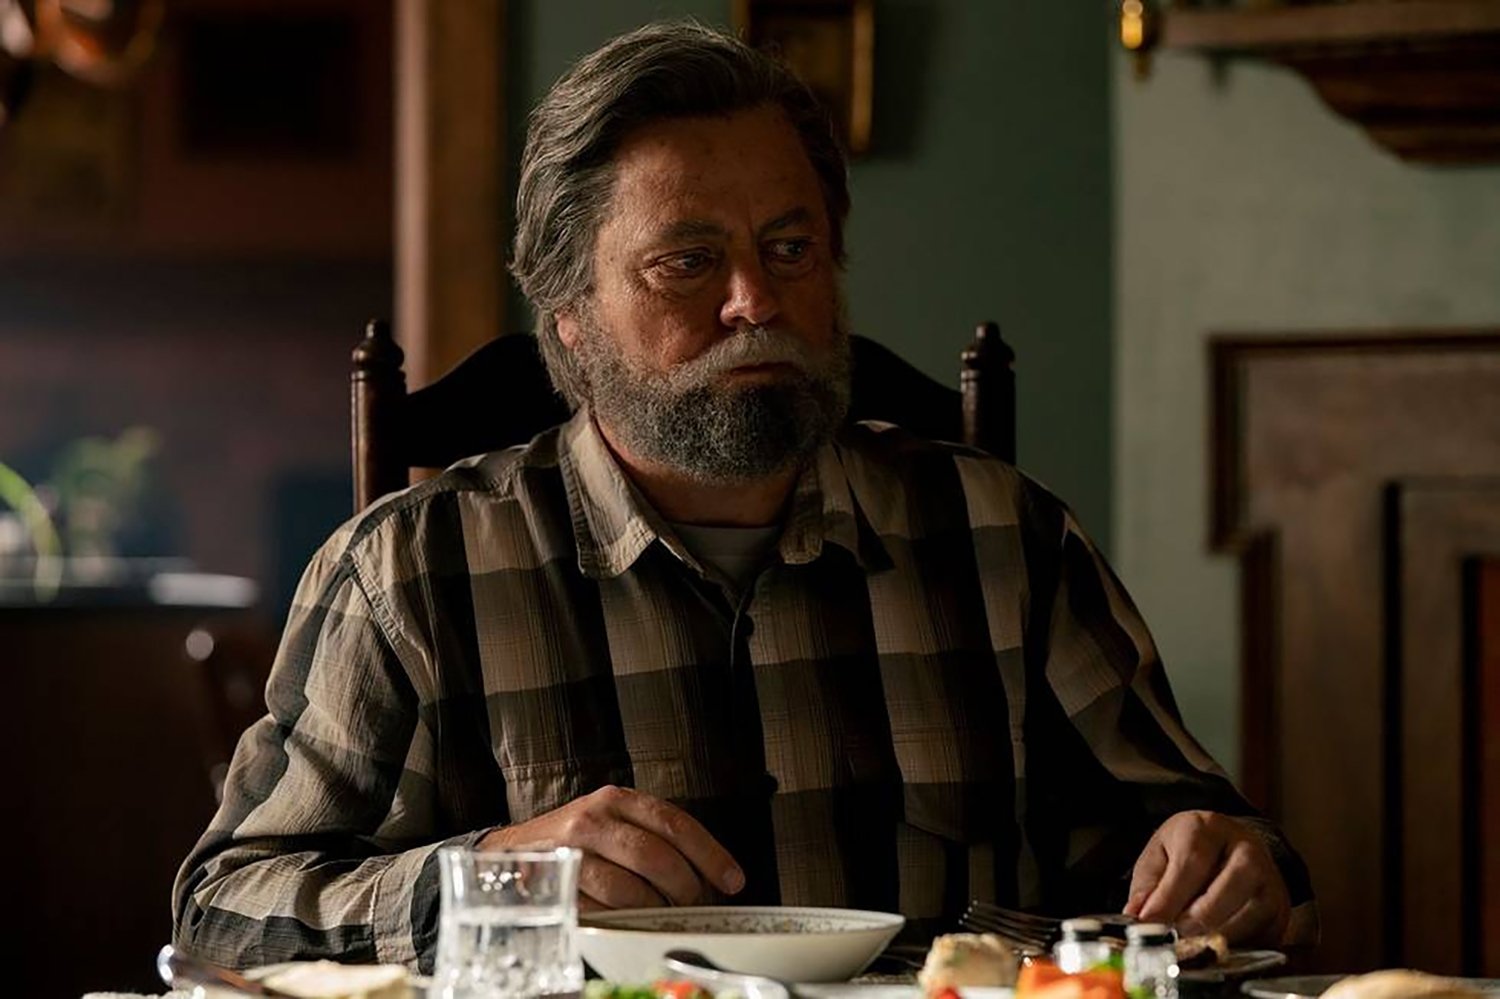 ‘The Last of Us’: Nick Offerman Says Episode 3 Had the ‘Greatest Script’ He’d Ever Seen